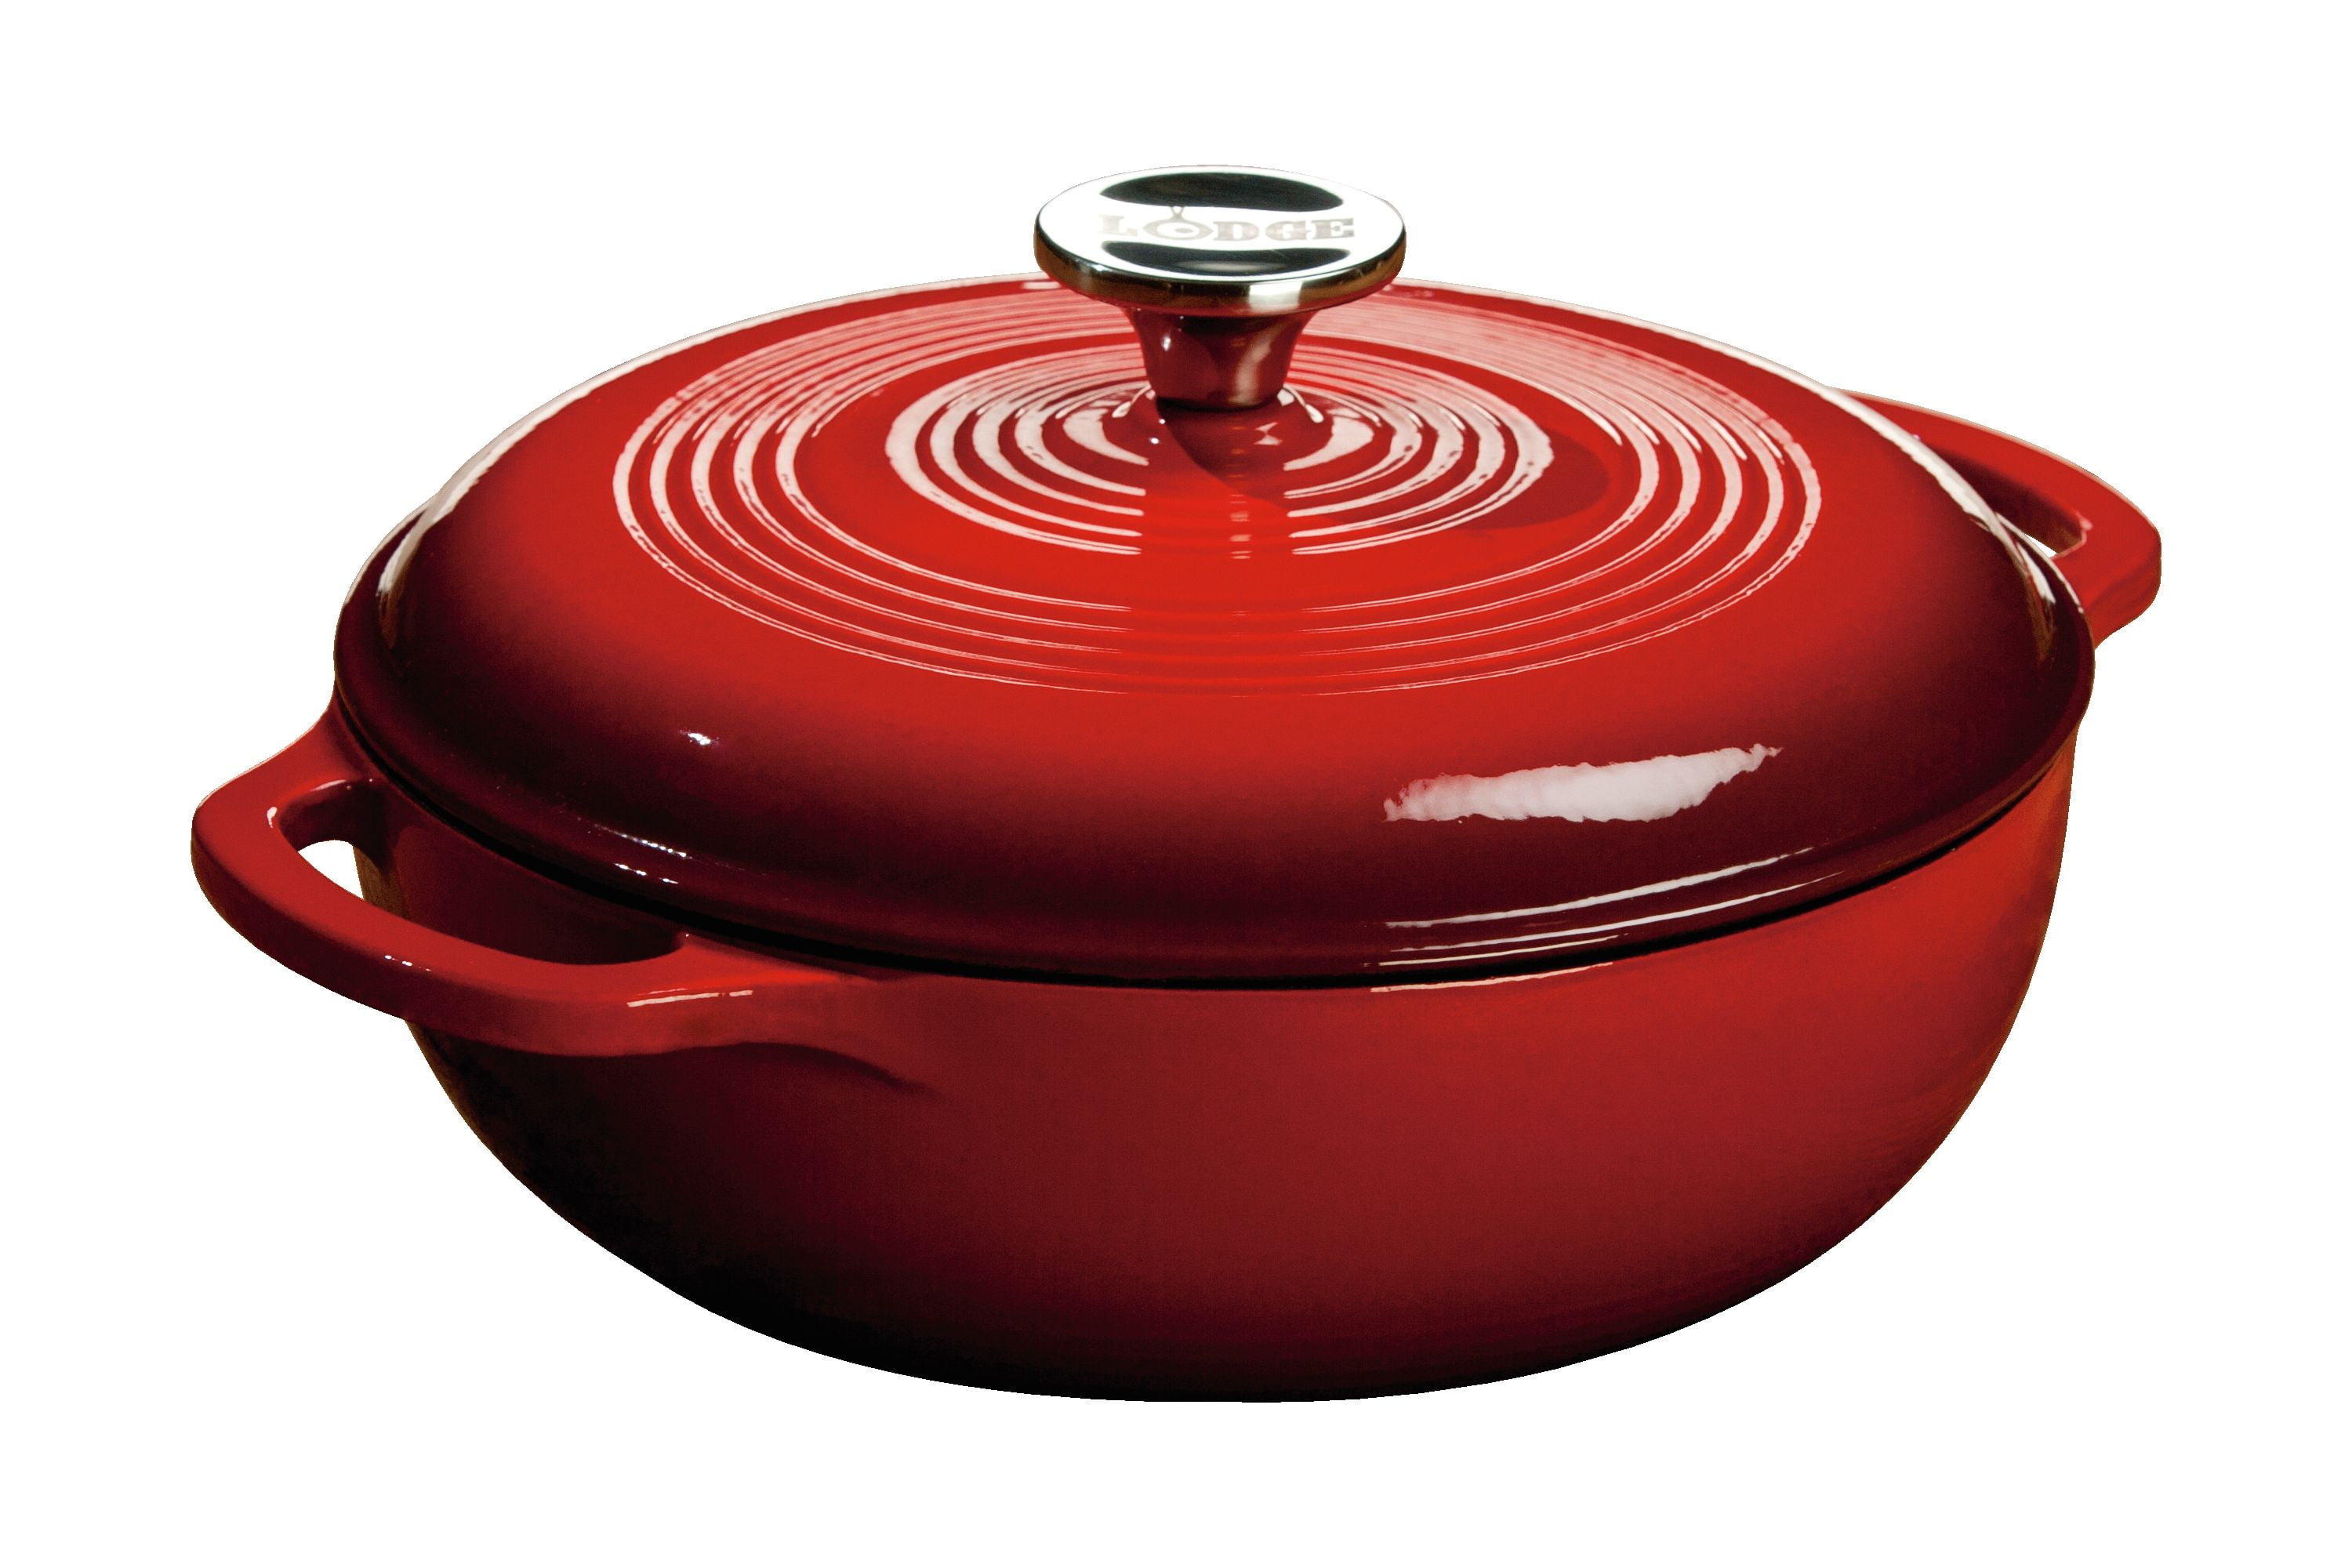 3-Quart Cast Iron Enamel Covered Dutch Oven with Lid